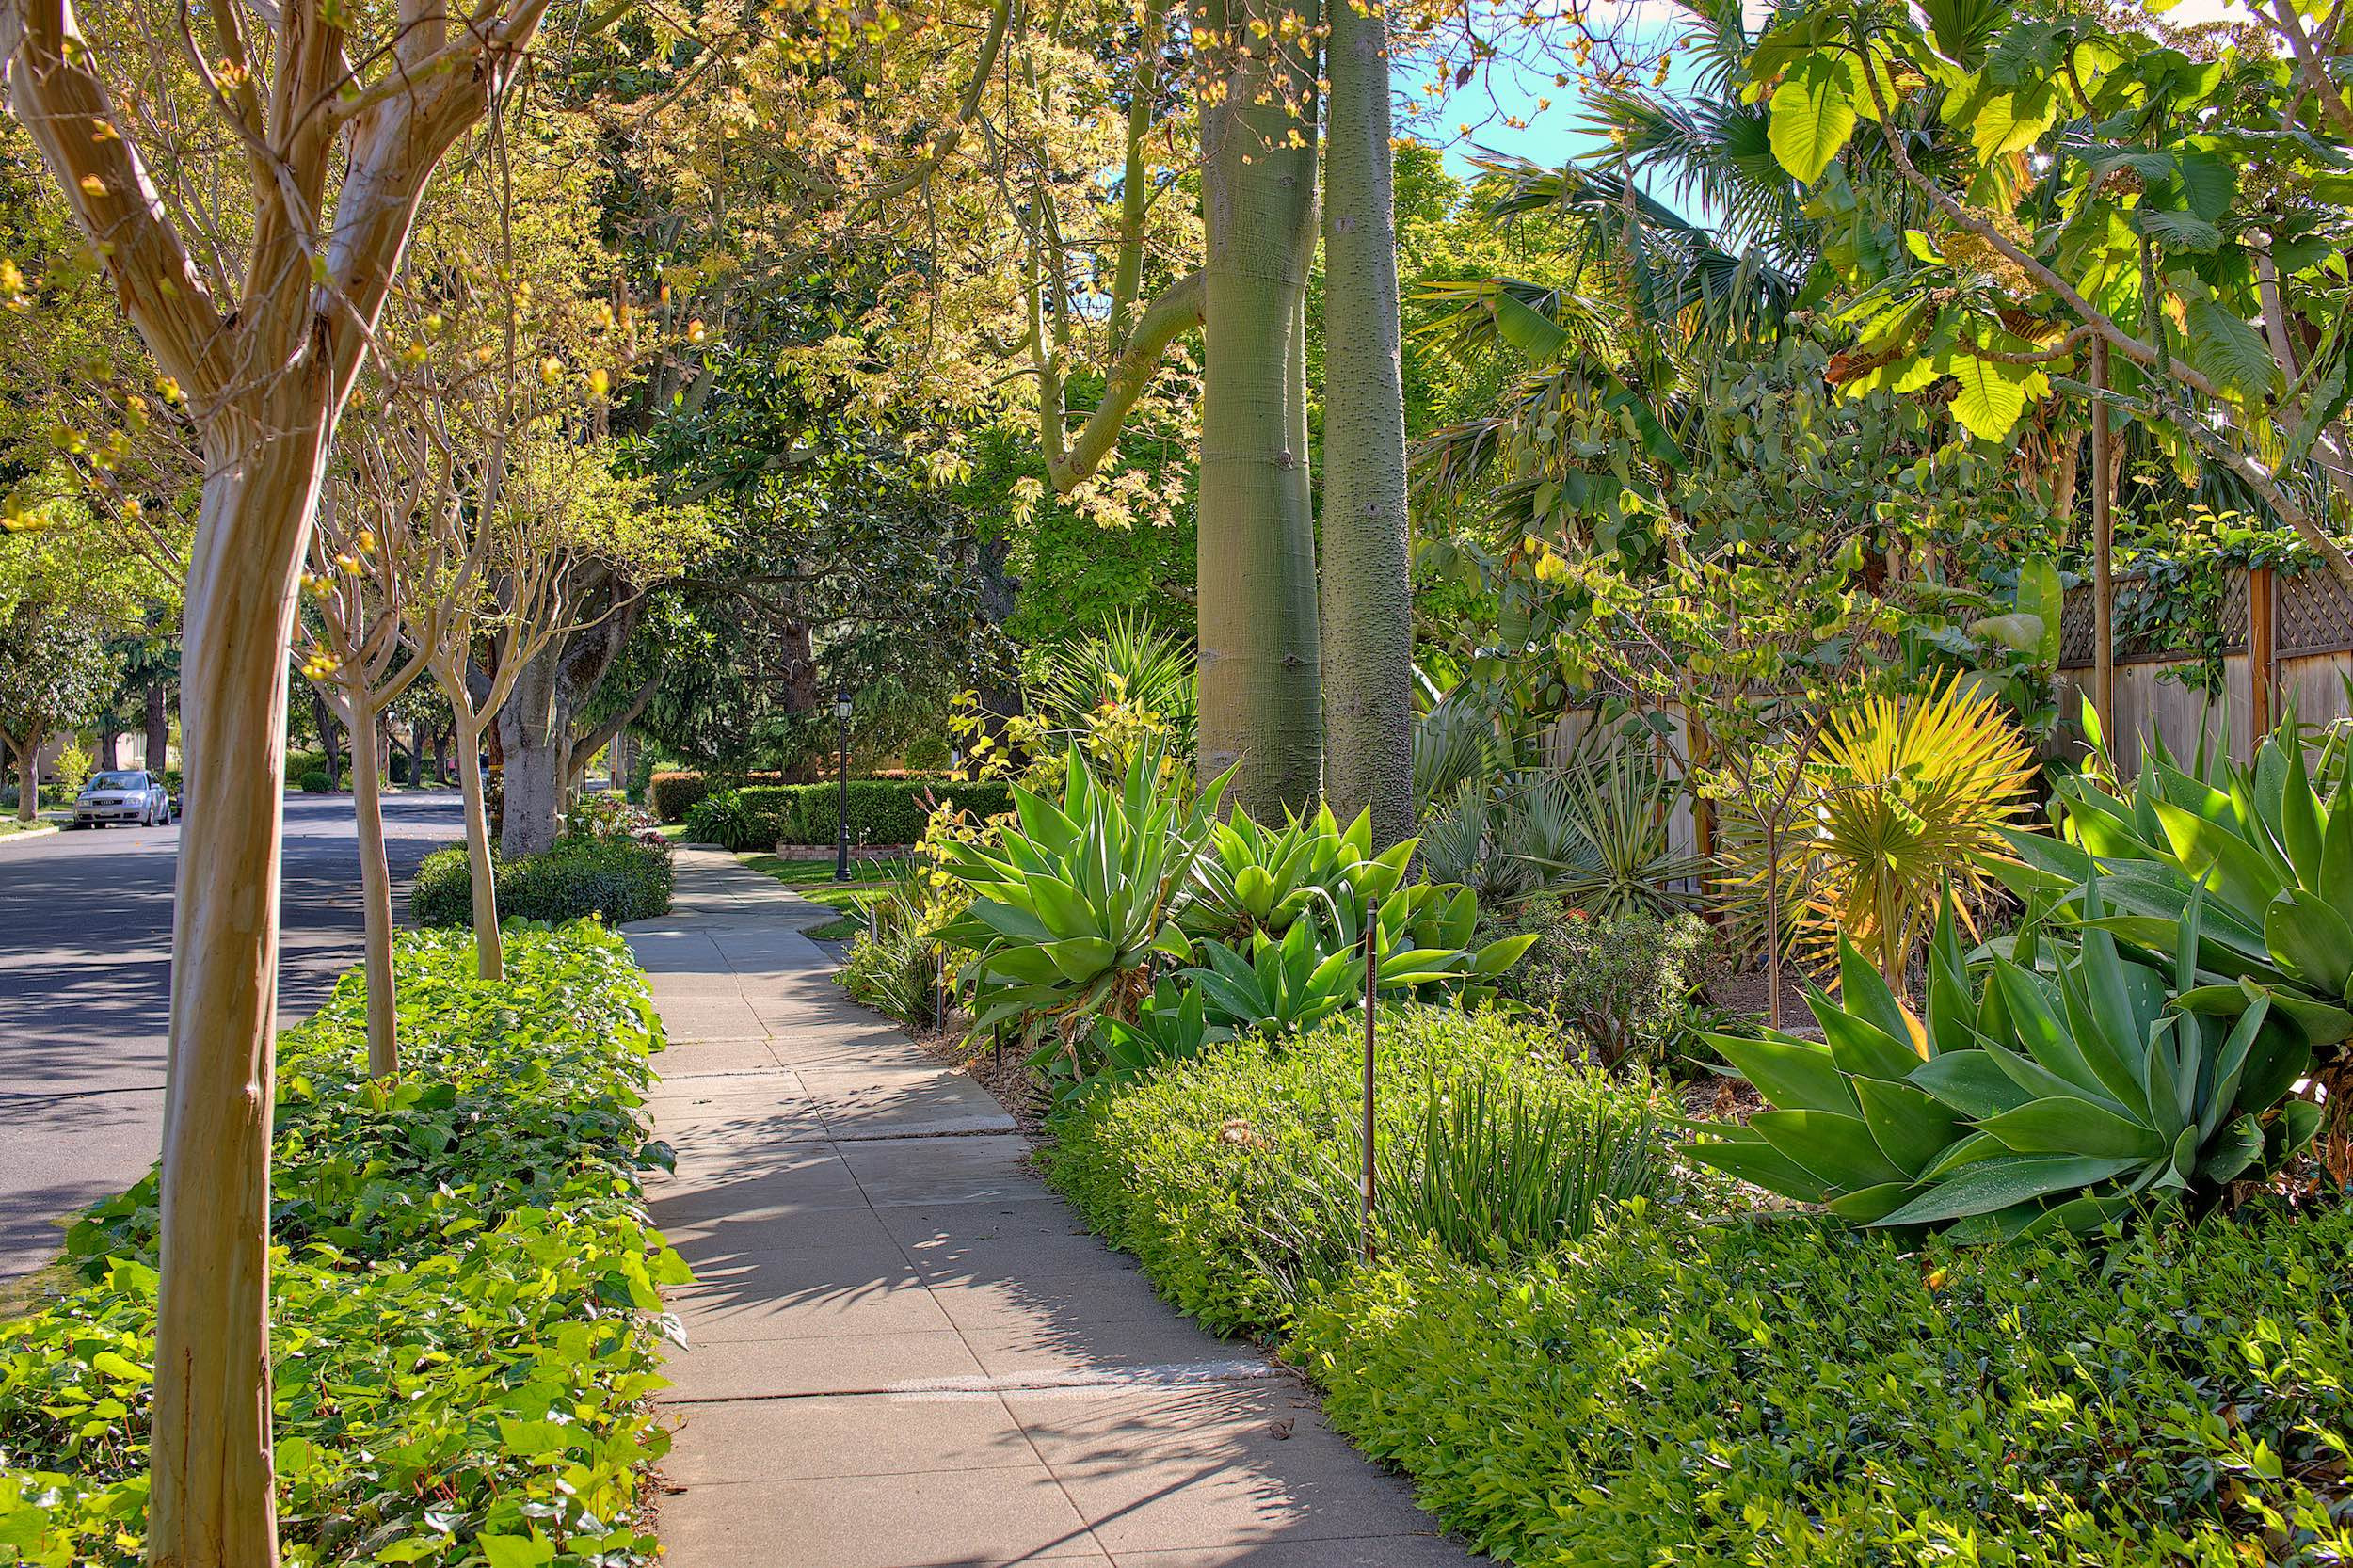 sidewalk in Redwood city with plants and trees